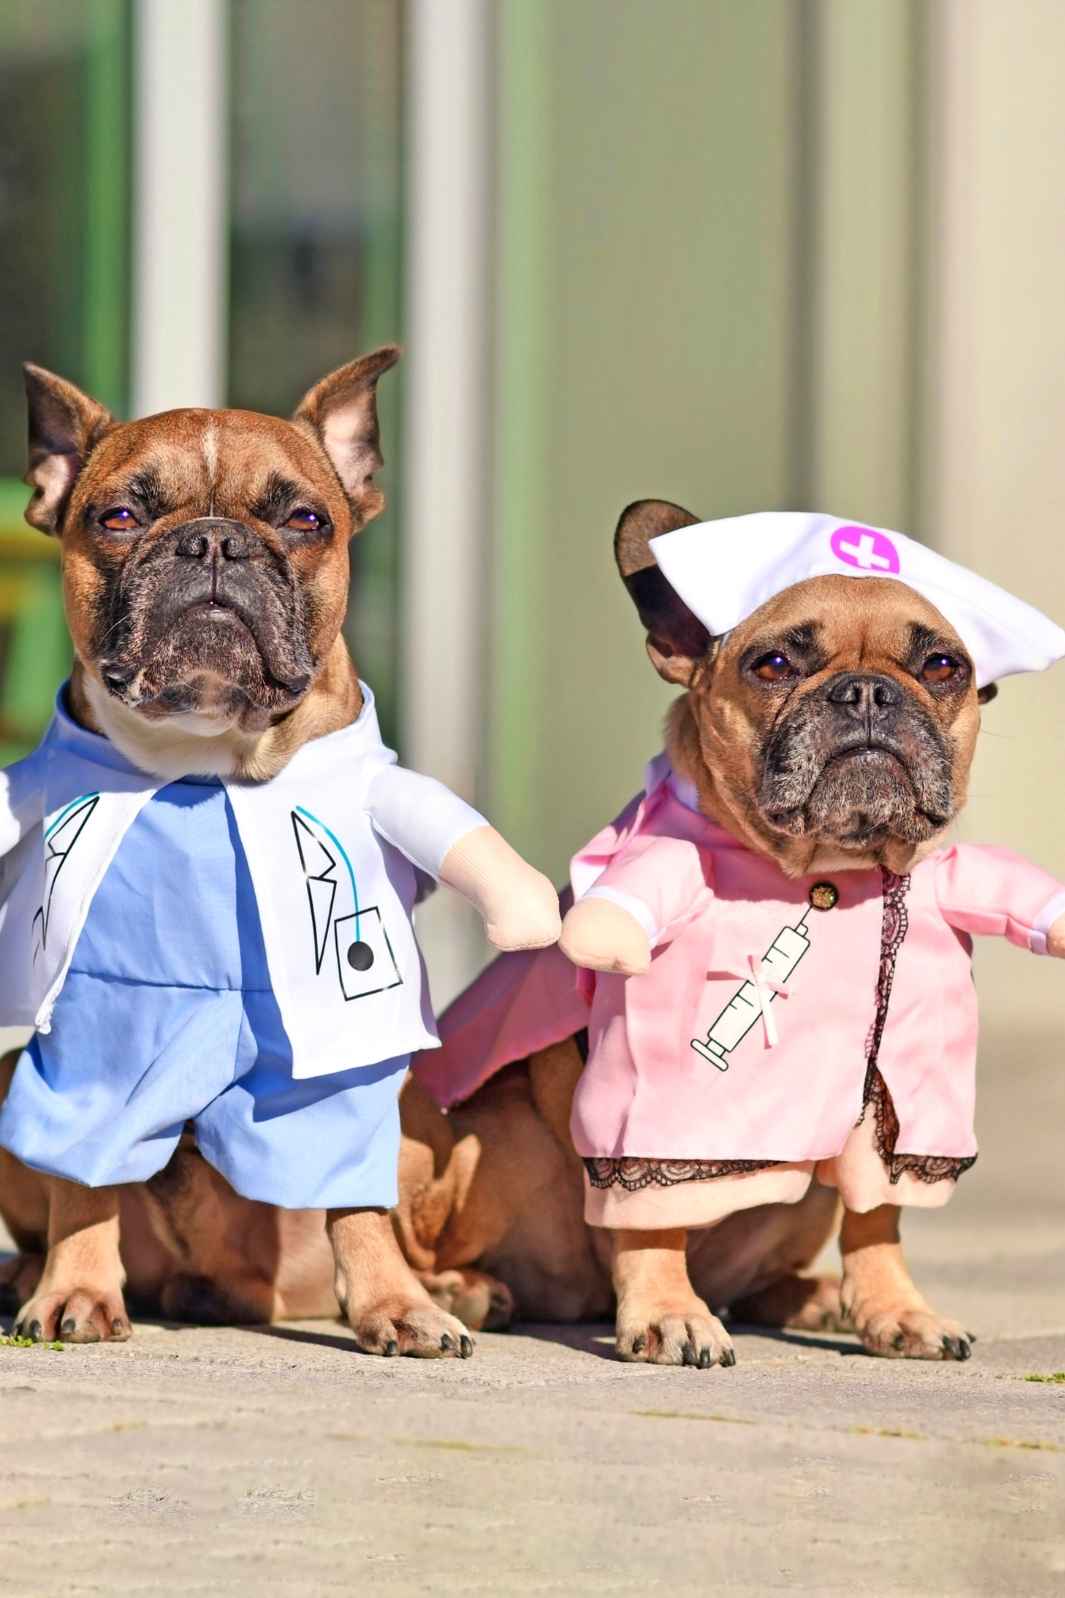 Adorable French Bulldogs dressed up as a Doctor and Nurse, celebrating Take Your Pet to Work Week.